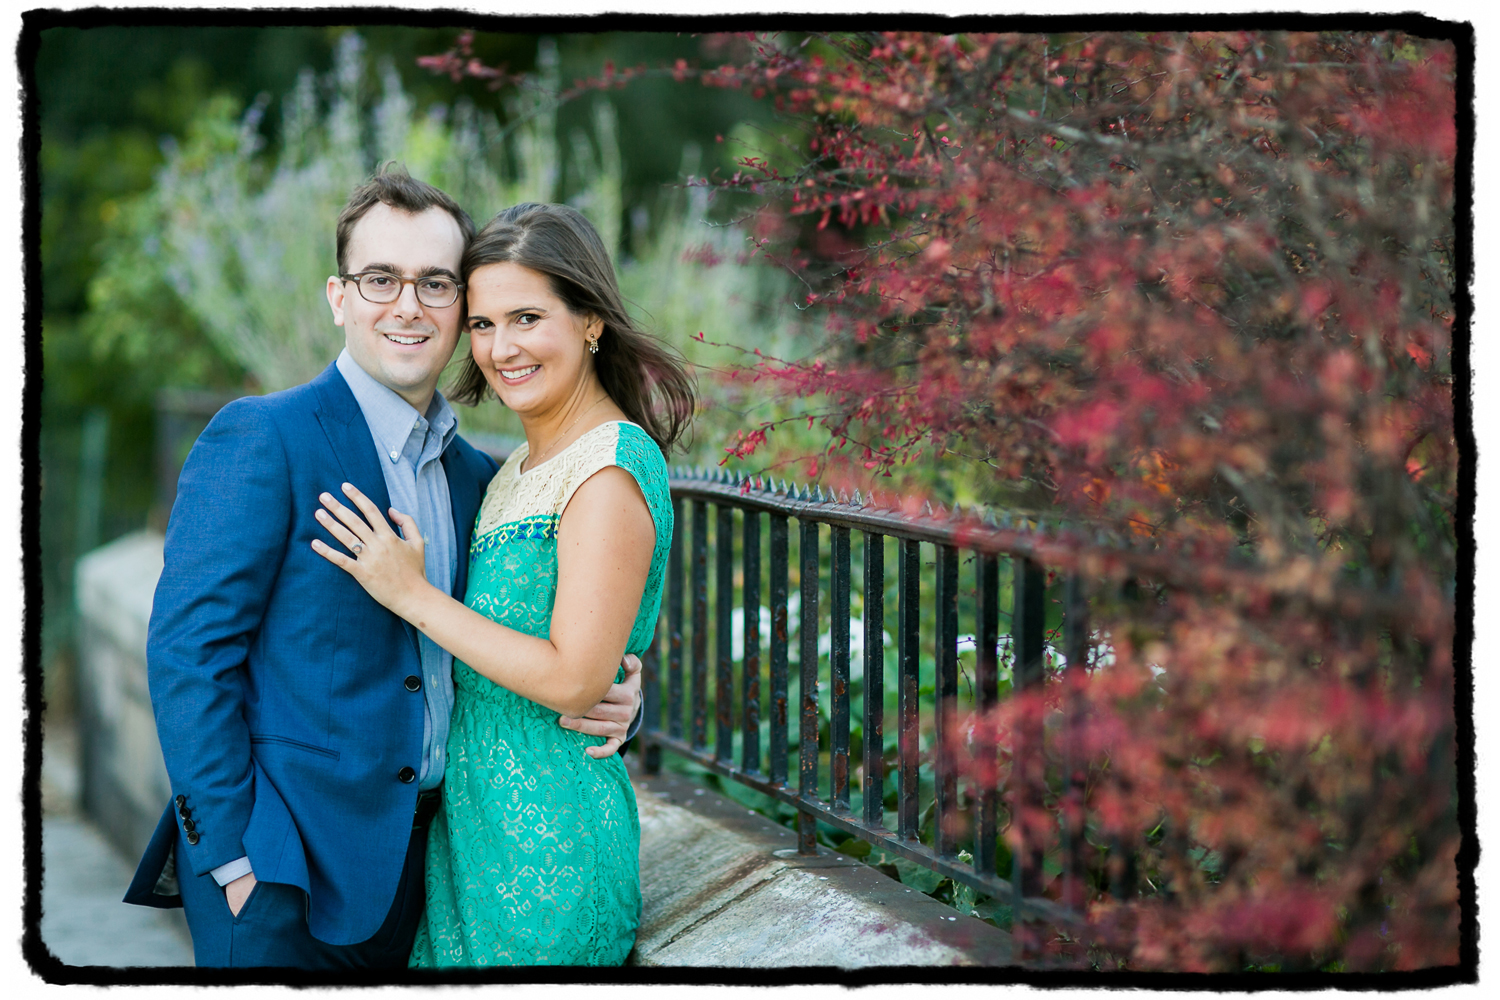 Engagement Portraits: Sarah & Jeff in a waterside park in Yorkville, Upper East Side.